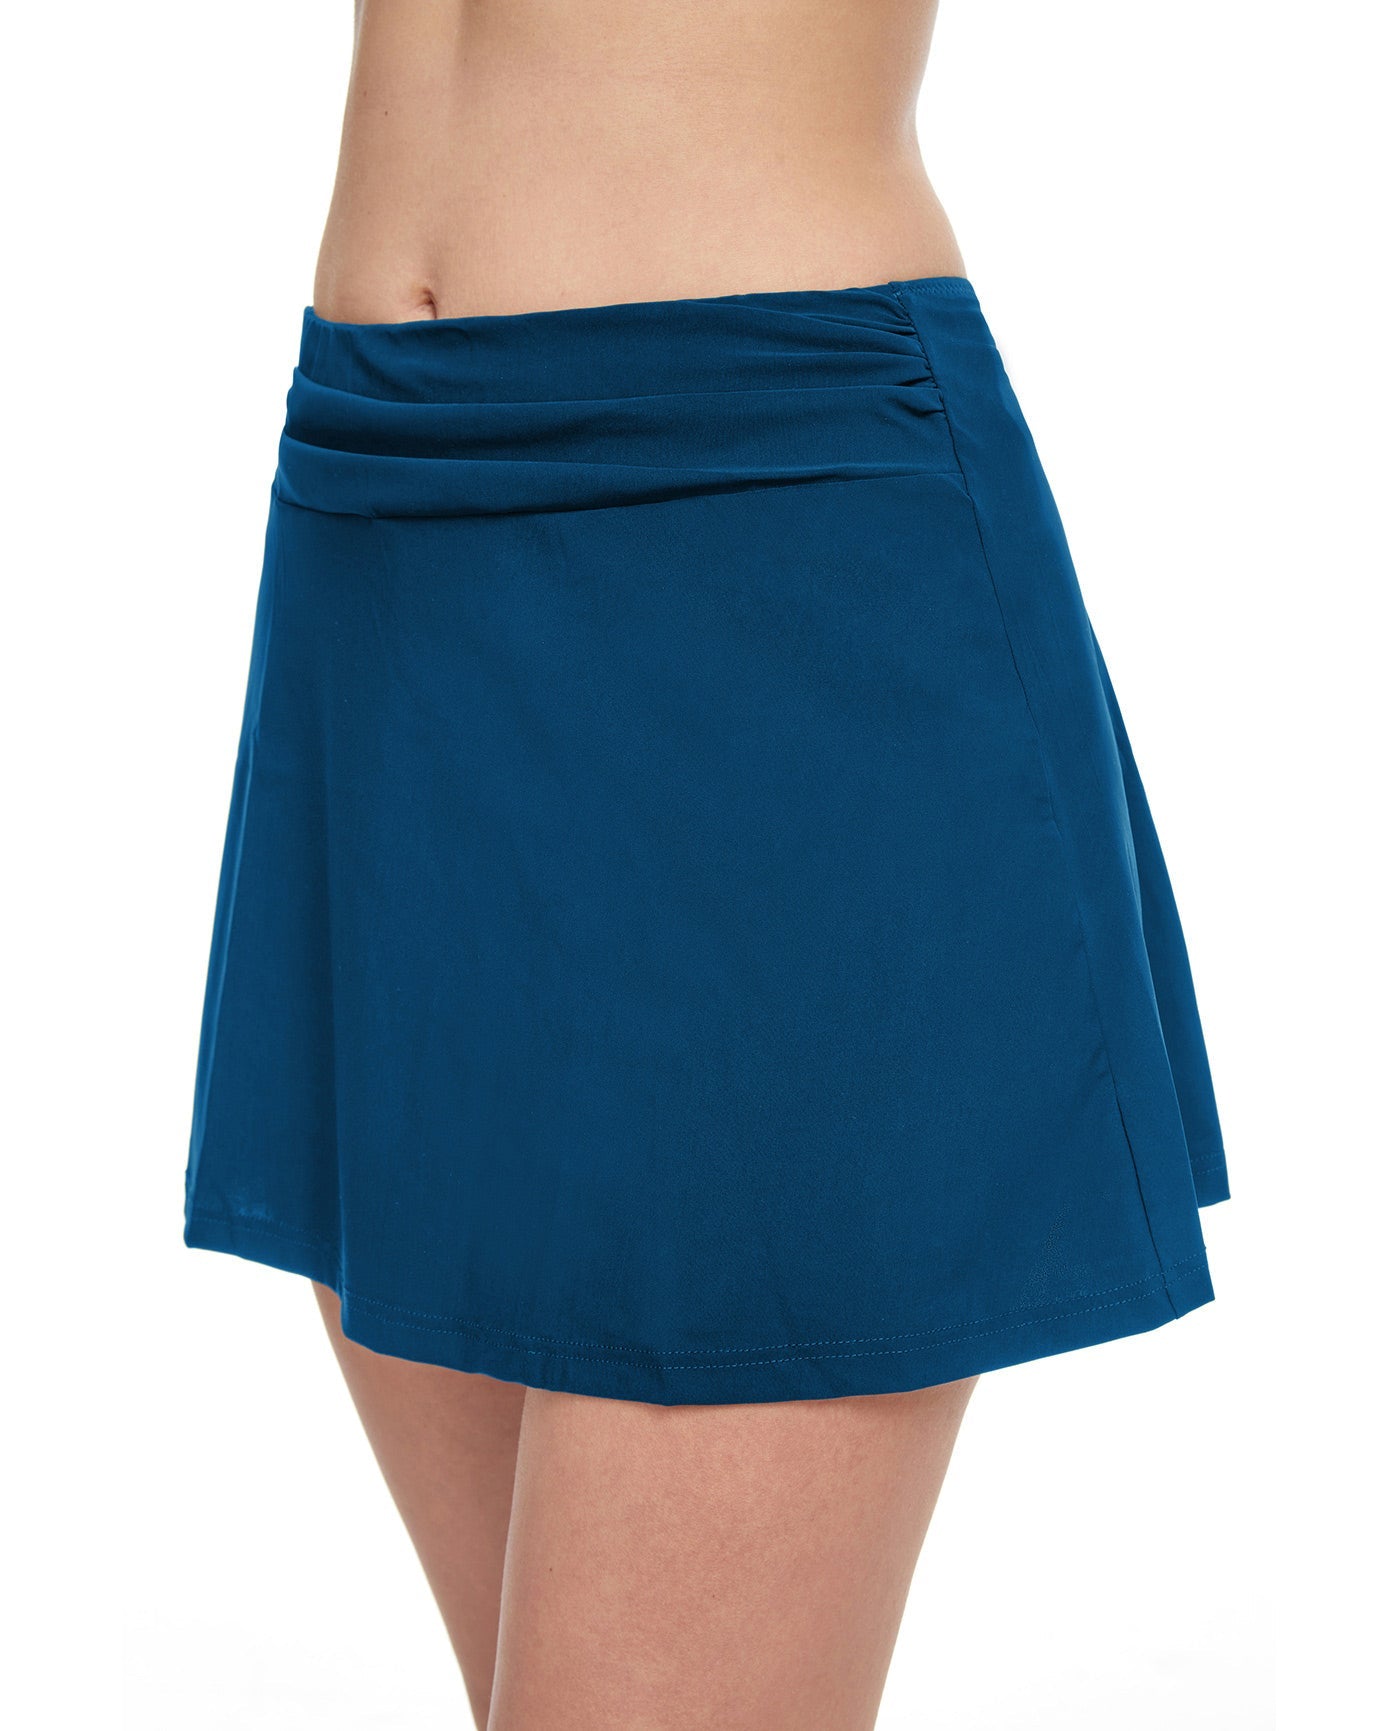 Profile by Gottex Tutti Frutti Cover Up Skirt | Cover Up | Cover Up ...